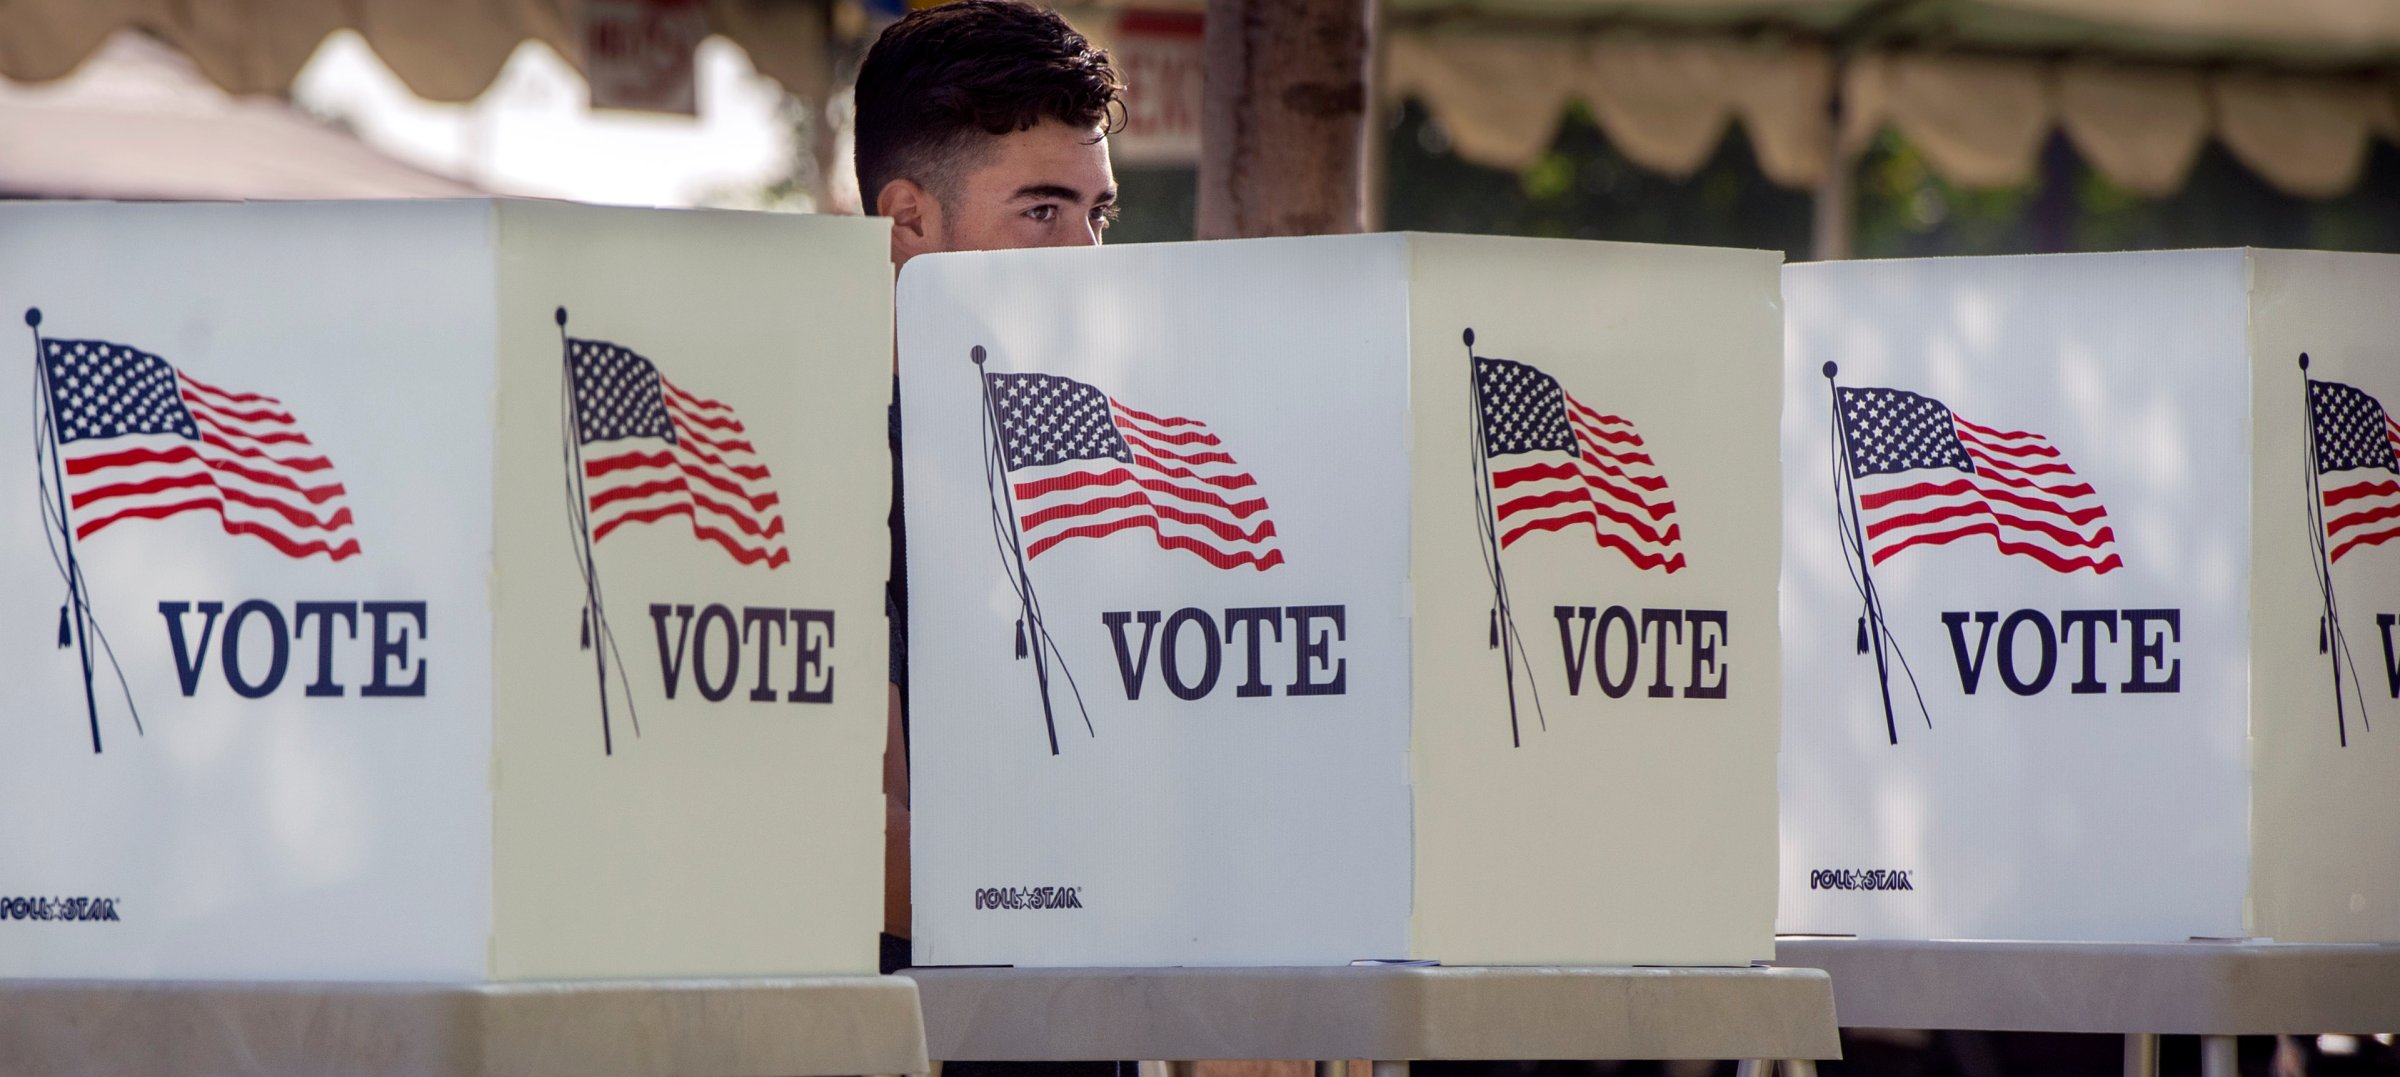 With Election Day Looming, Los Angeles 18-Year-Old Students Just Voted Early During Power California Event